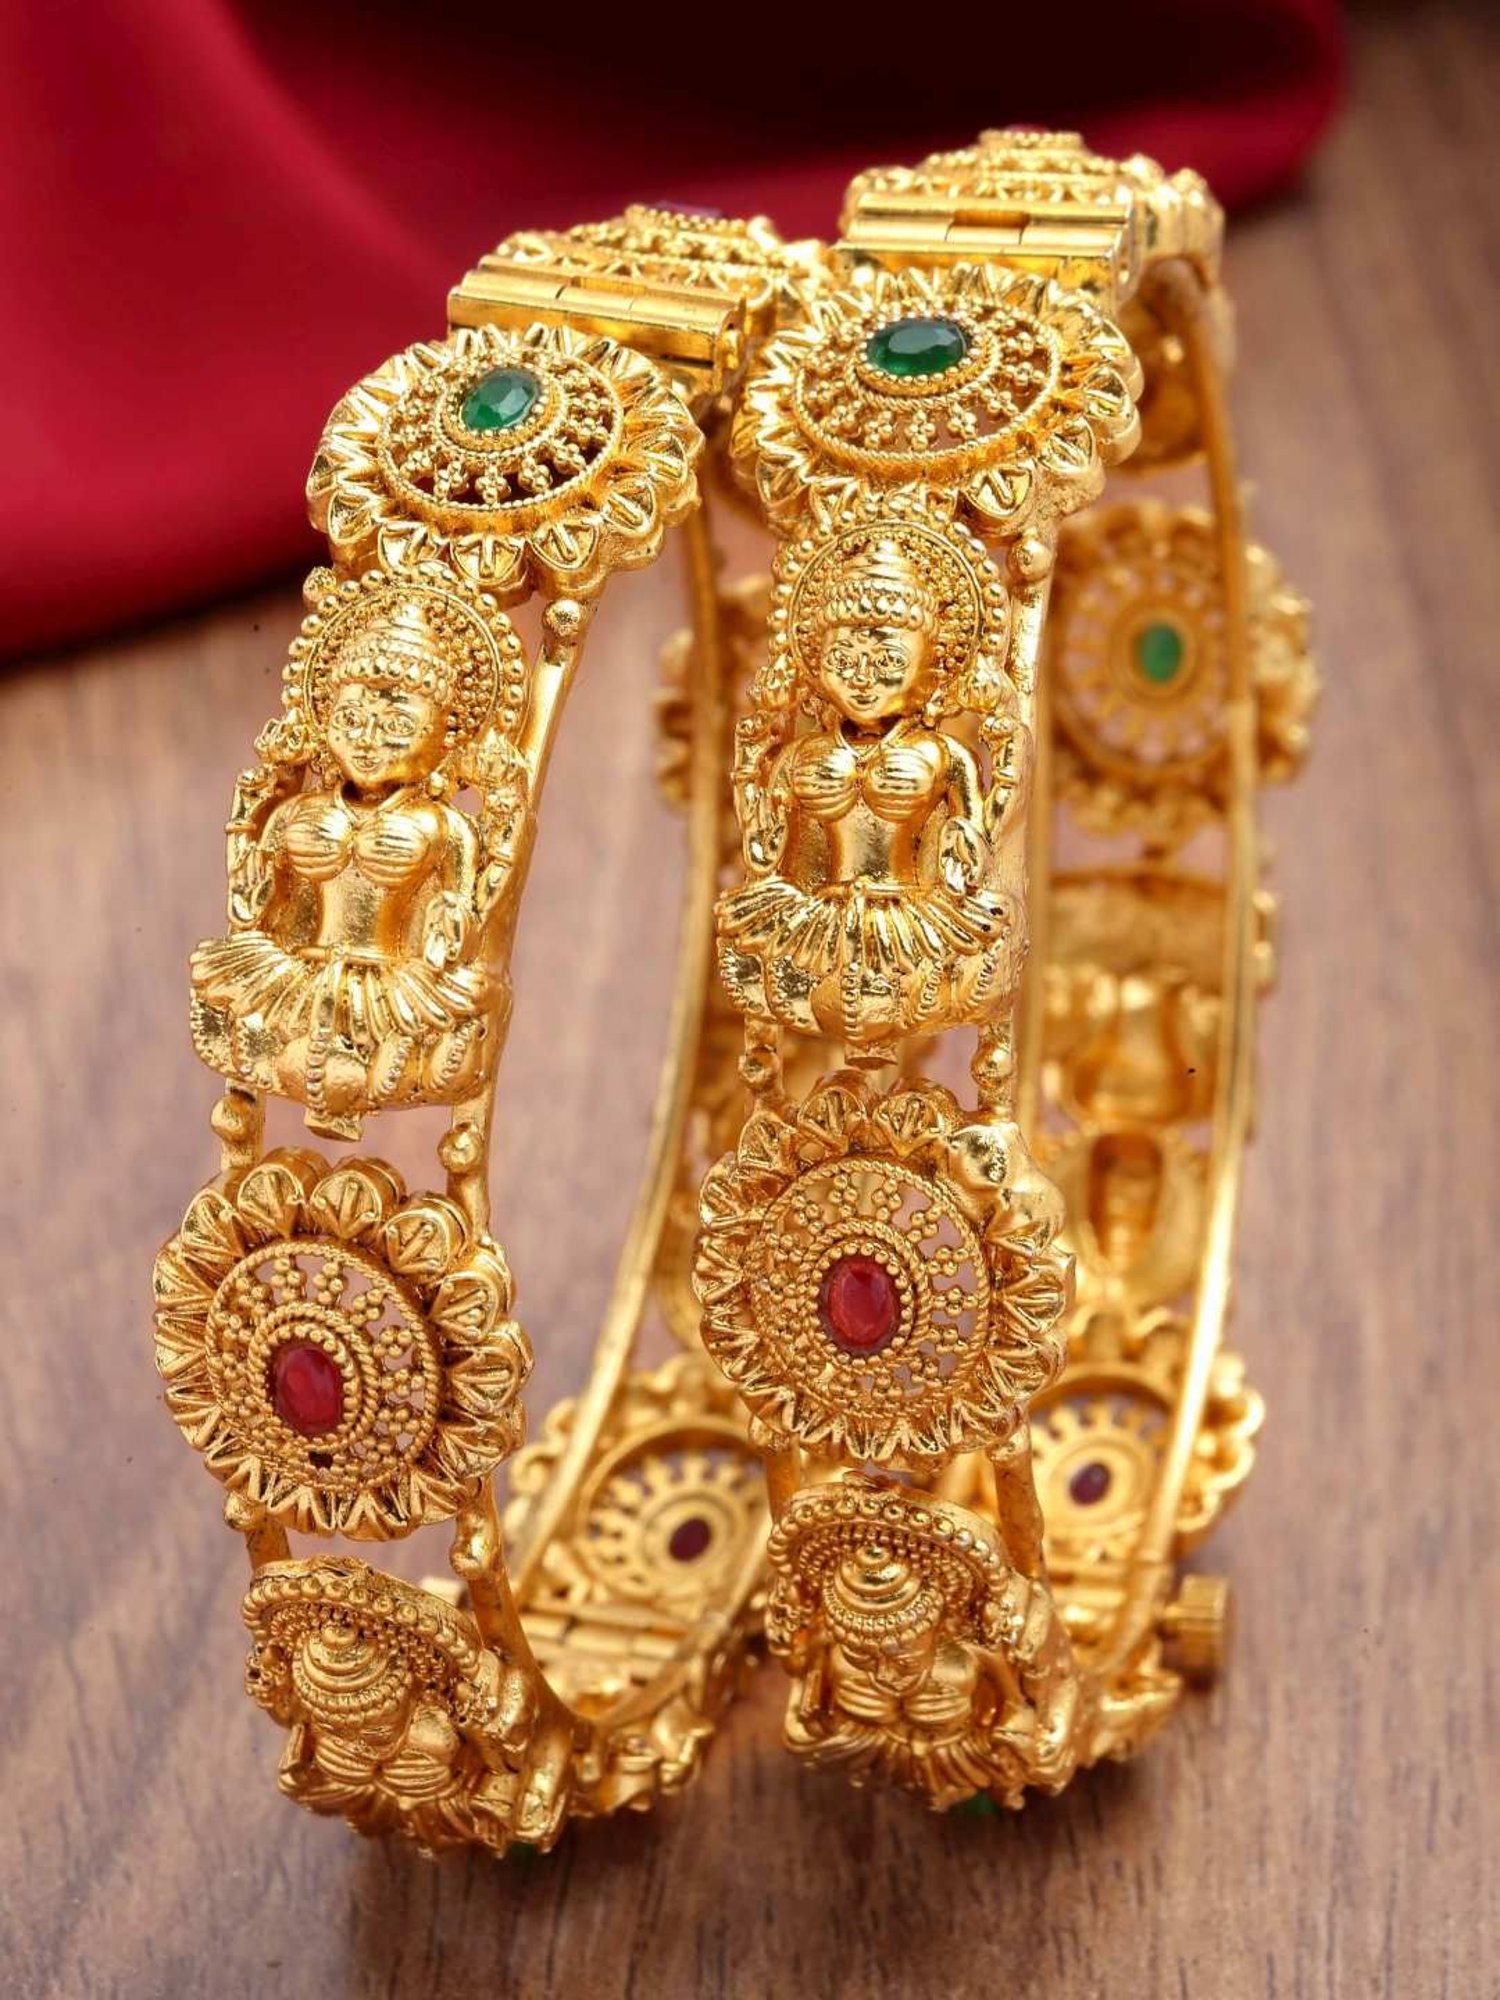 Temple Jewellery Bangles - 9 Trending and Stunning Designs